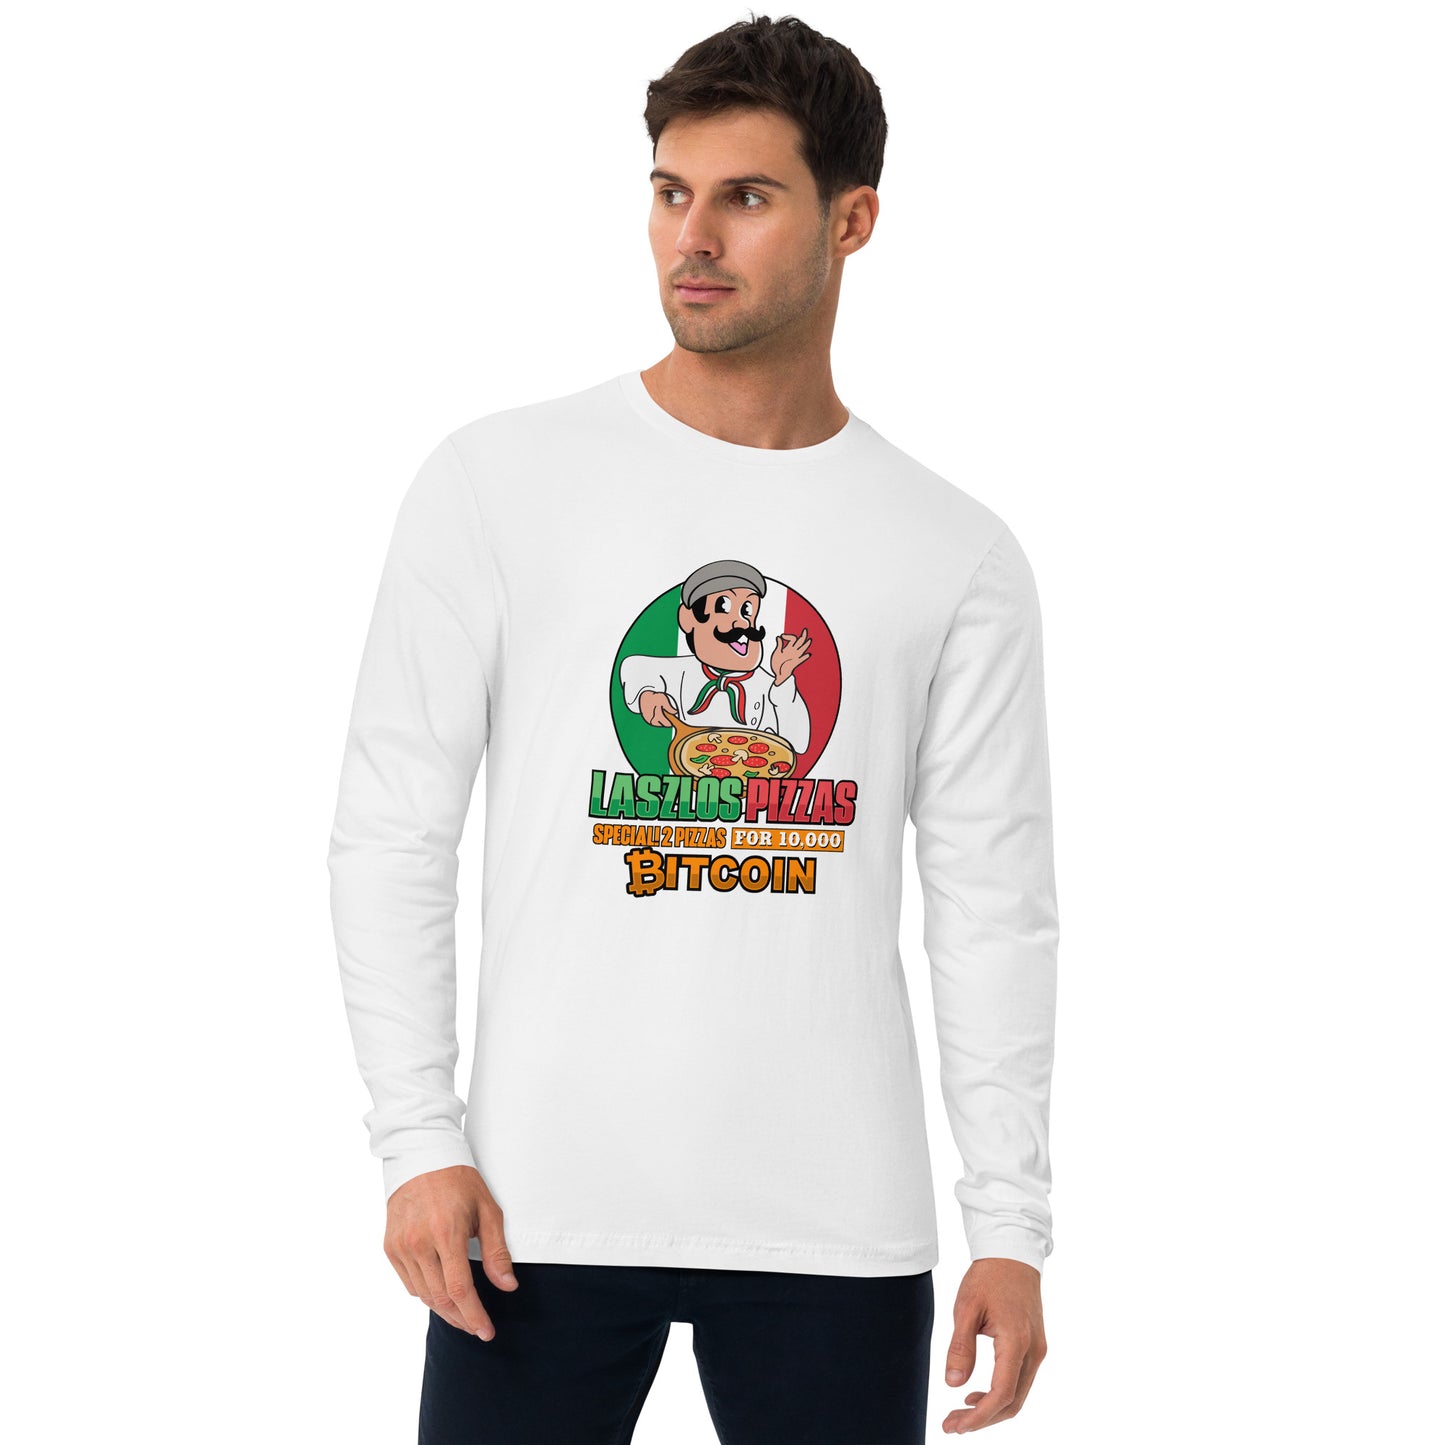 Bitcoin Pizza Day Long Sleeve Fitted Crew